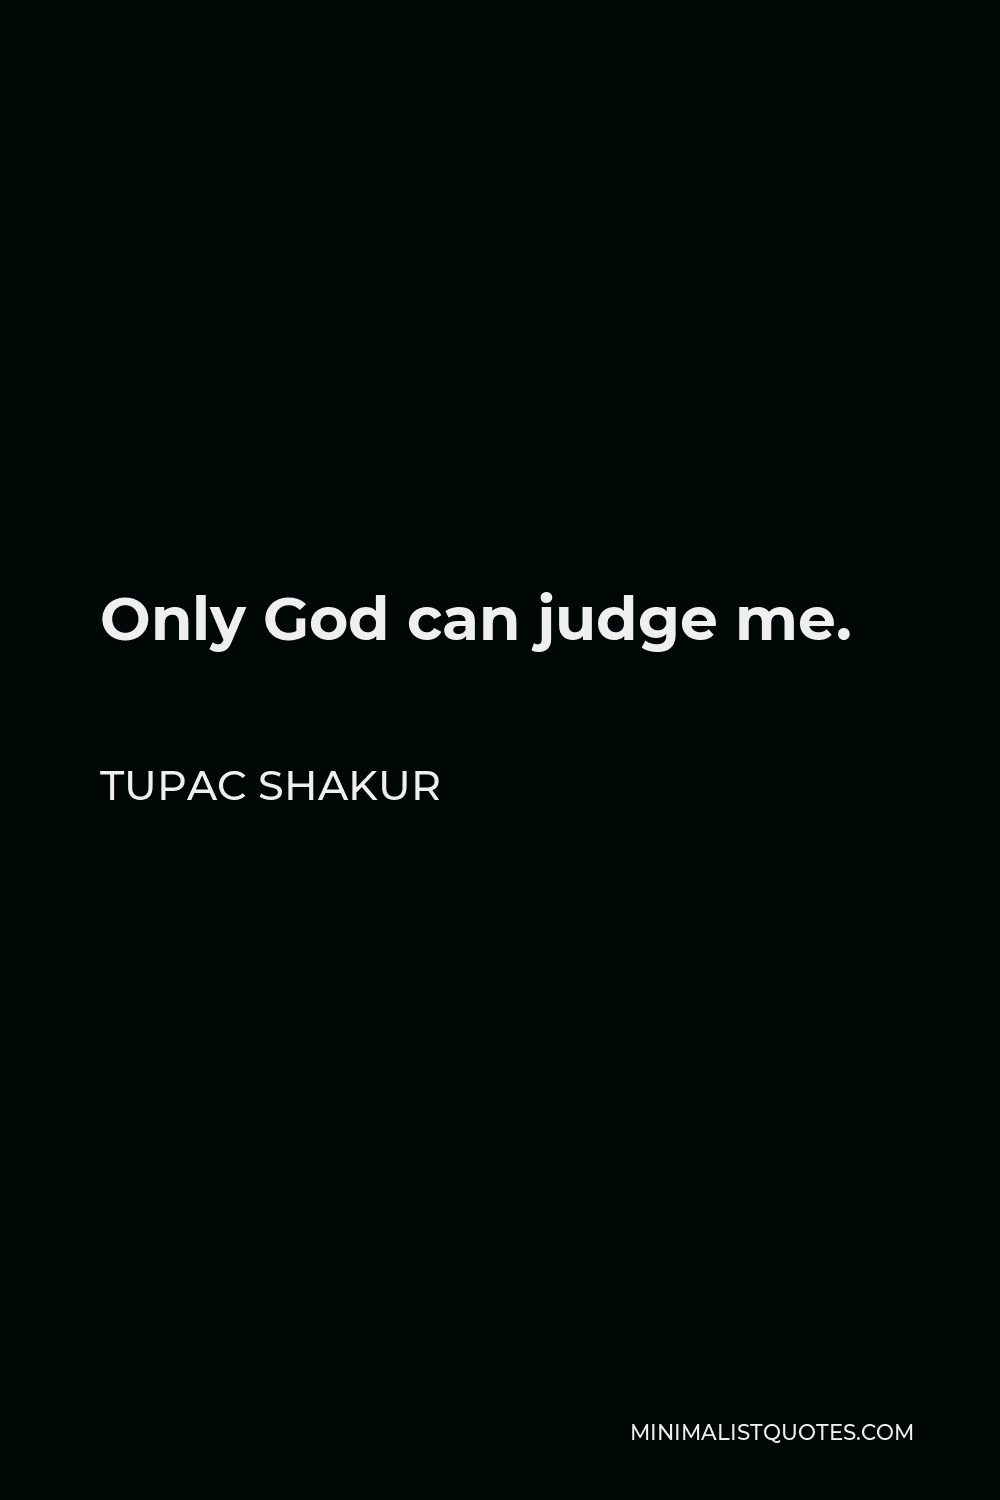 2pac only god can judge me who sampled